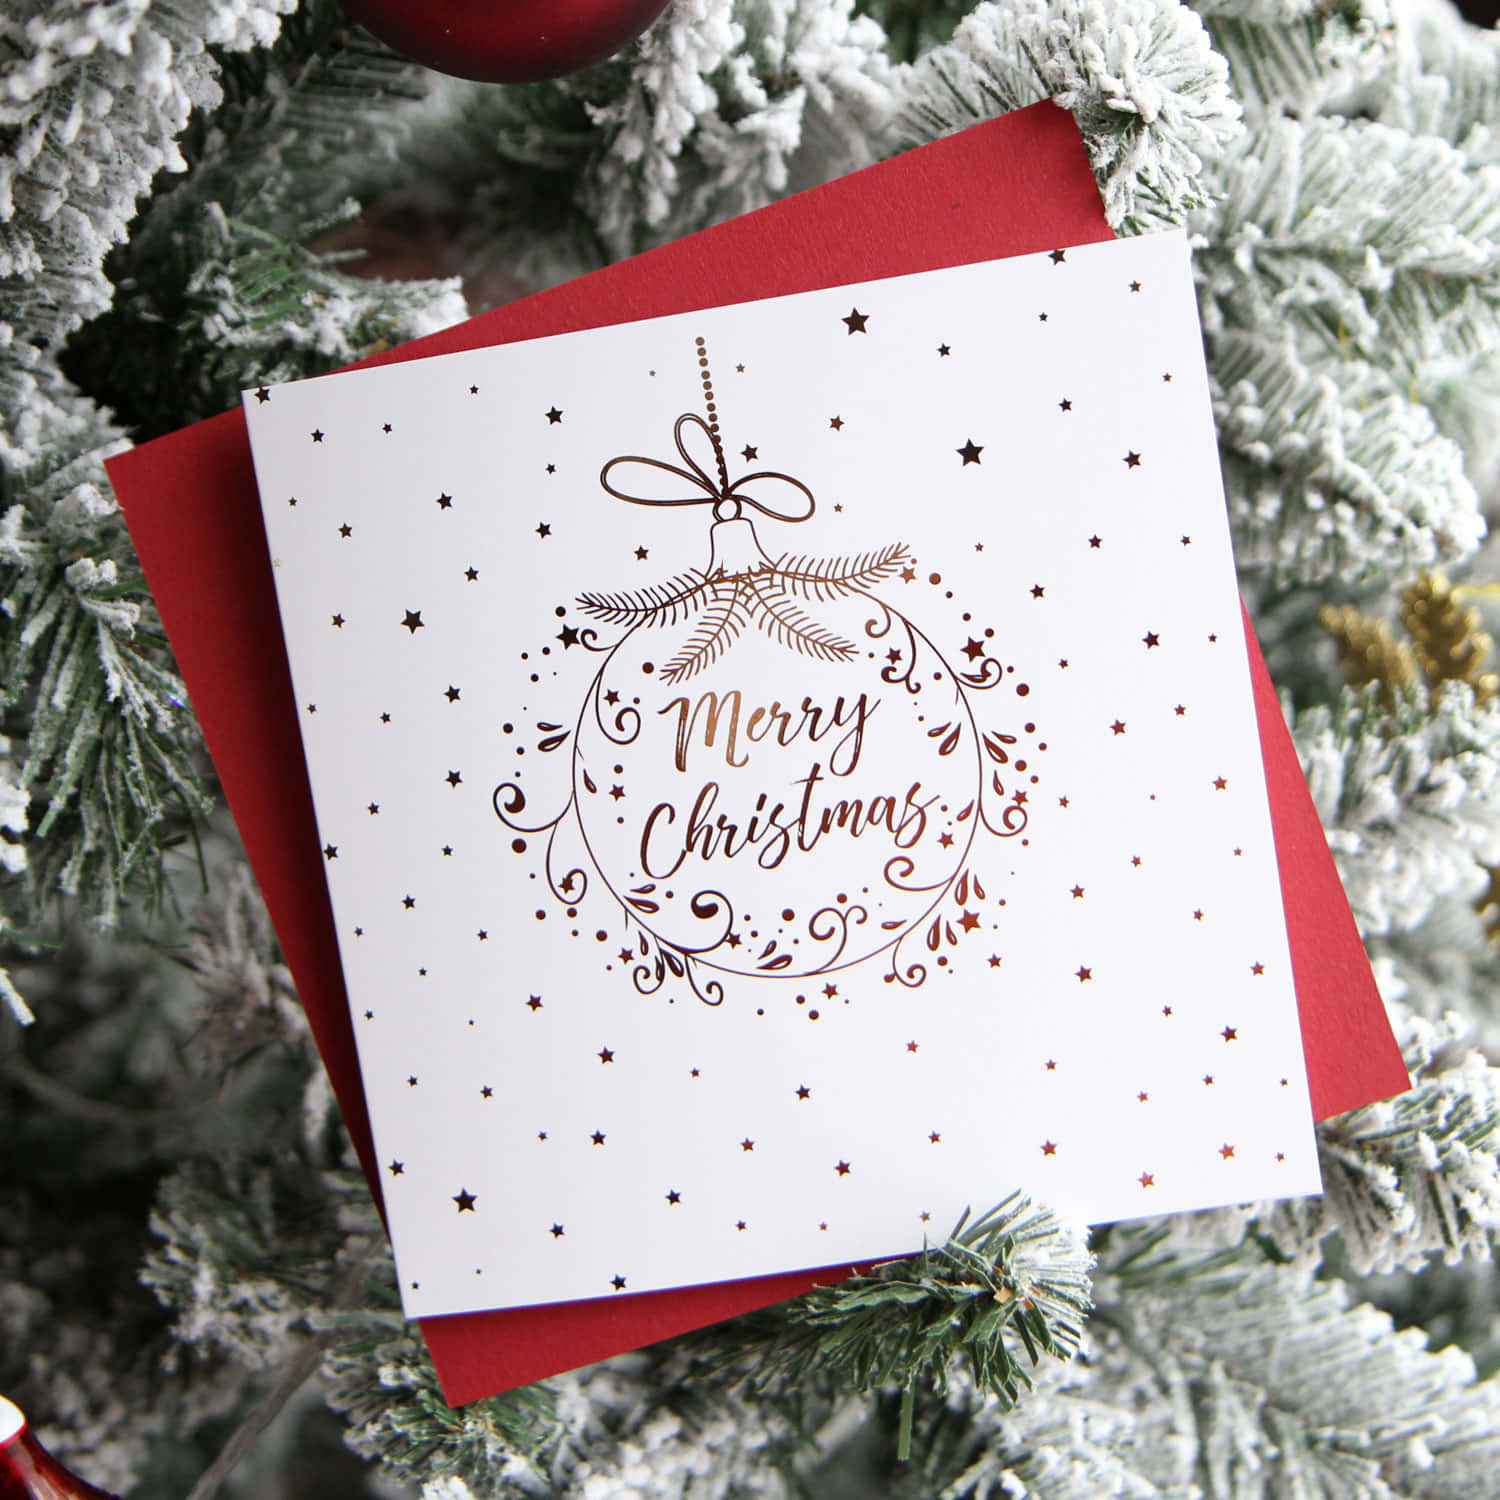 A Christmas Card With A Red And White Ornament